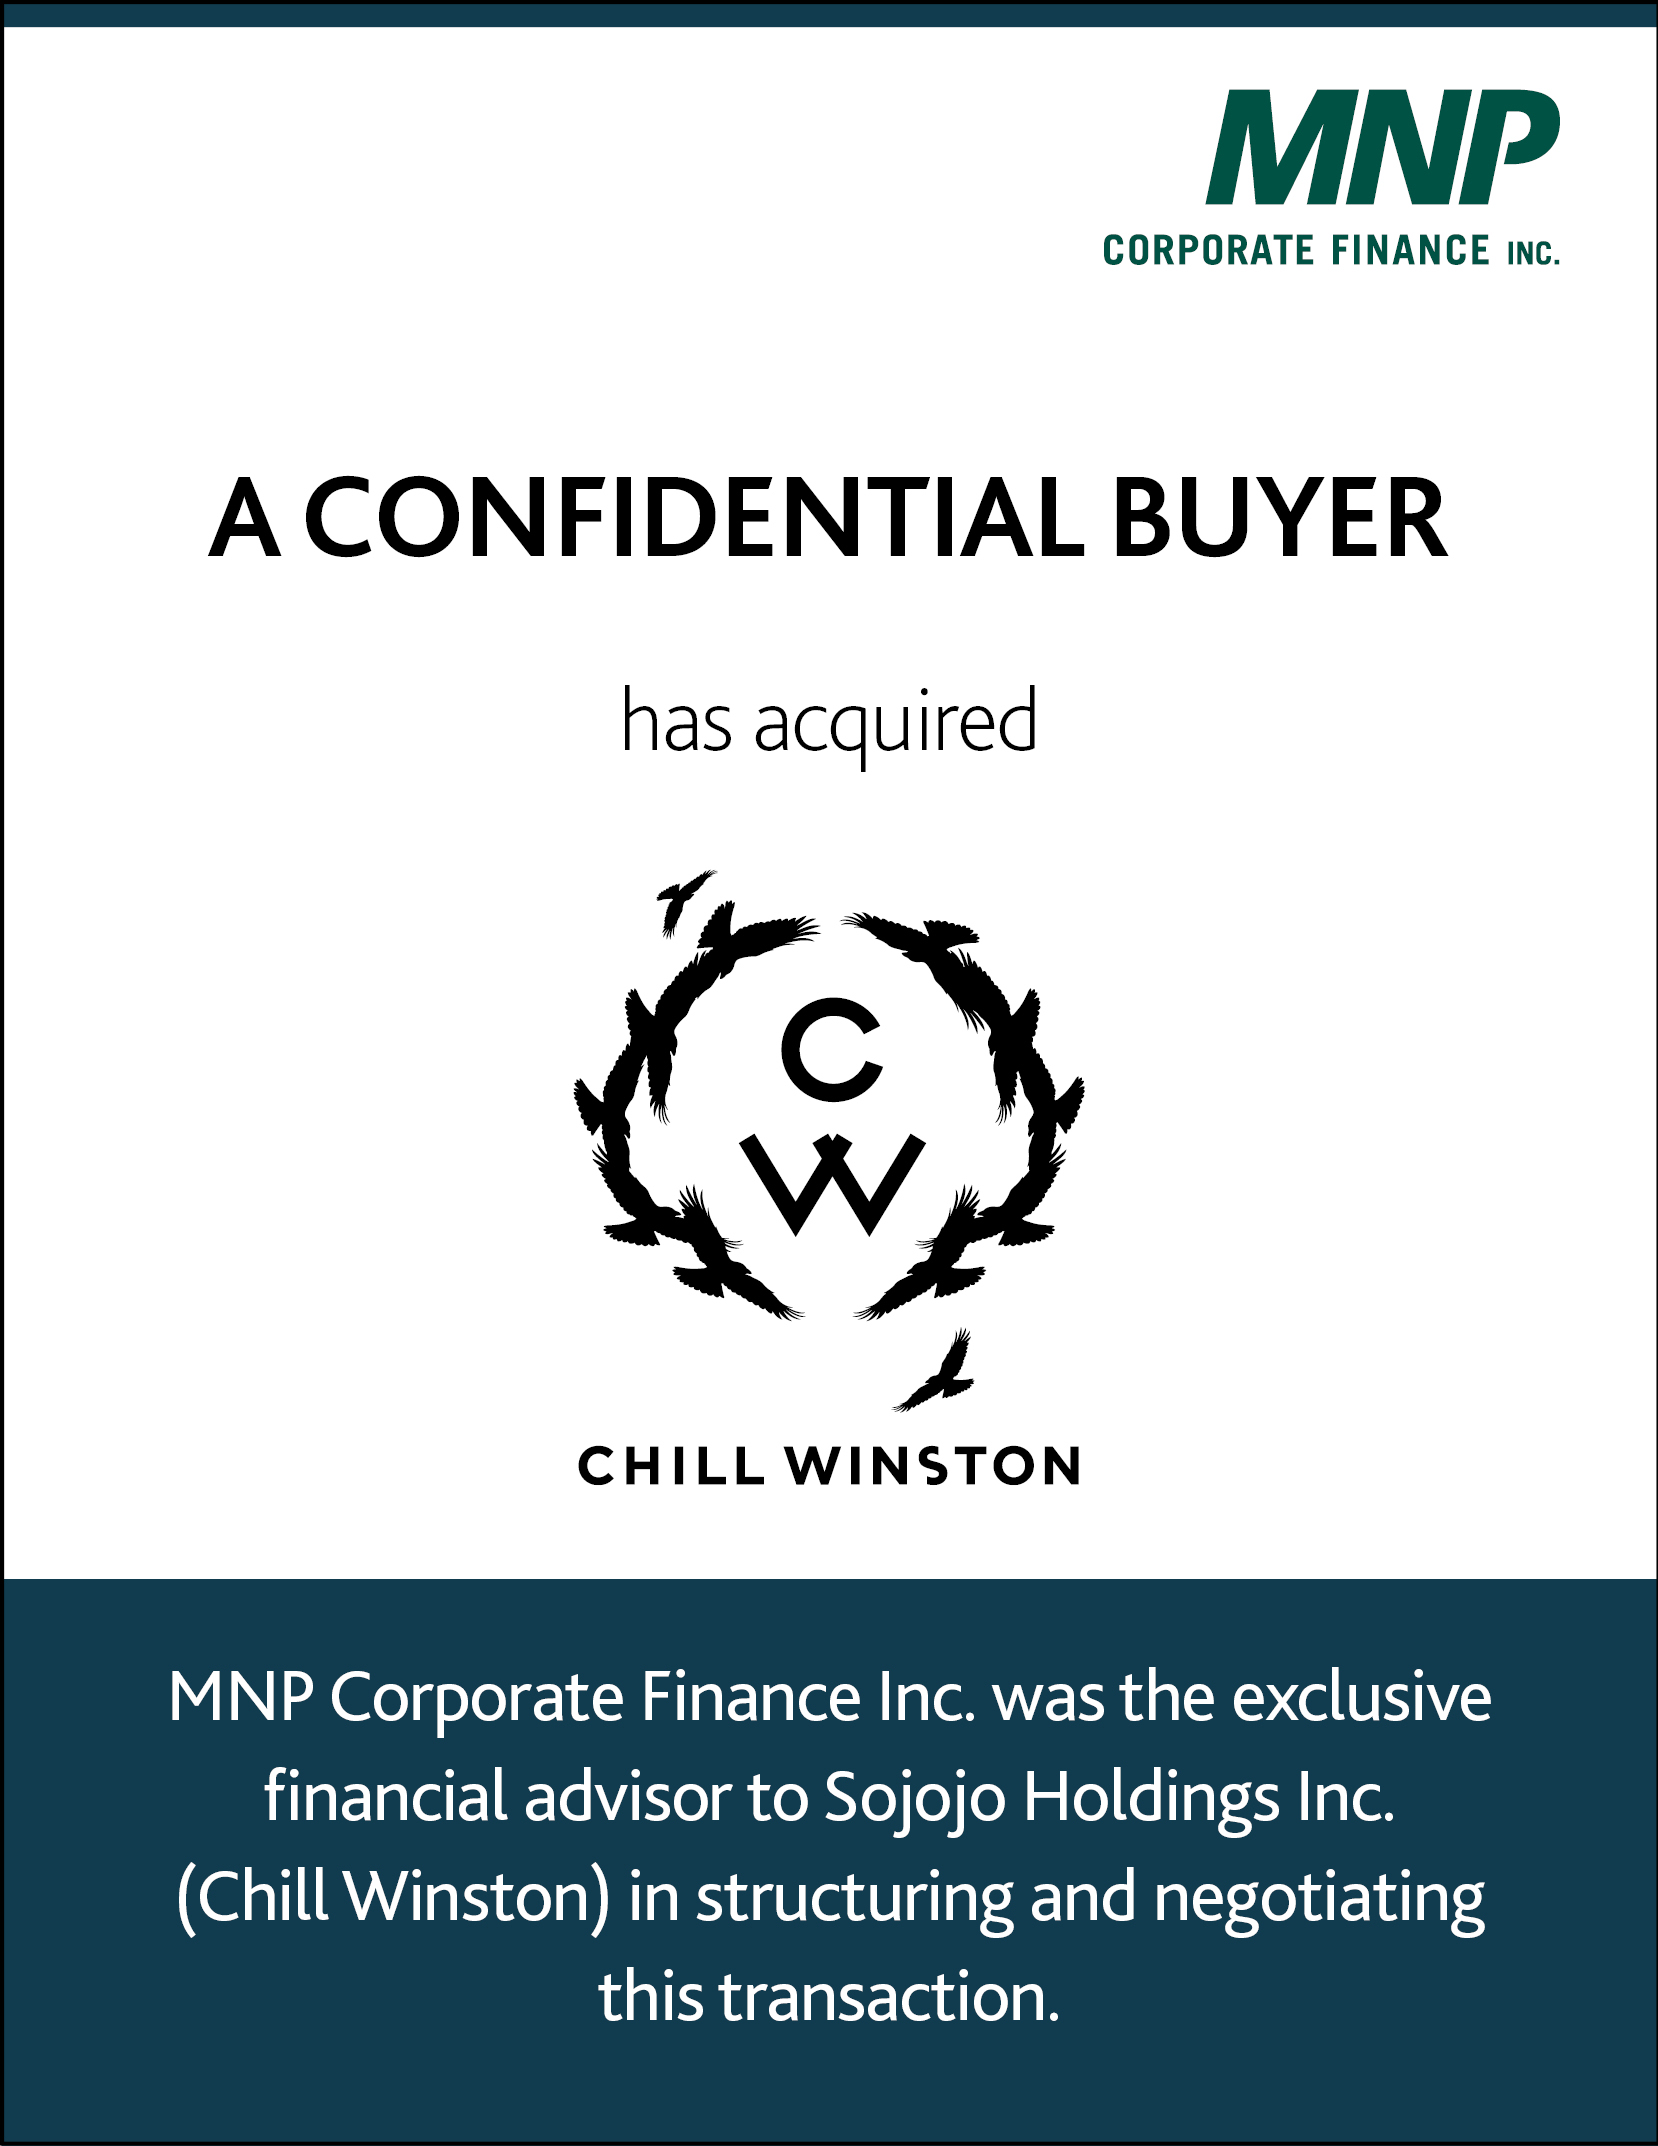 A confidential buyer has acquired Sojojo Holdings Inc.